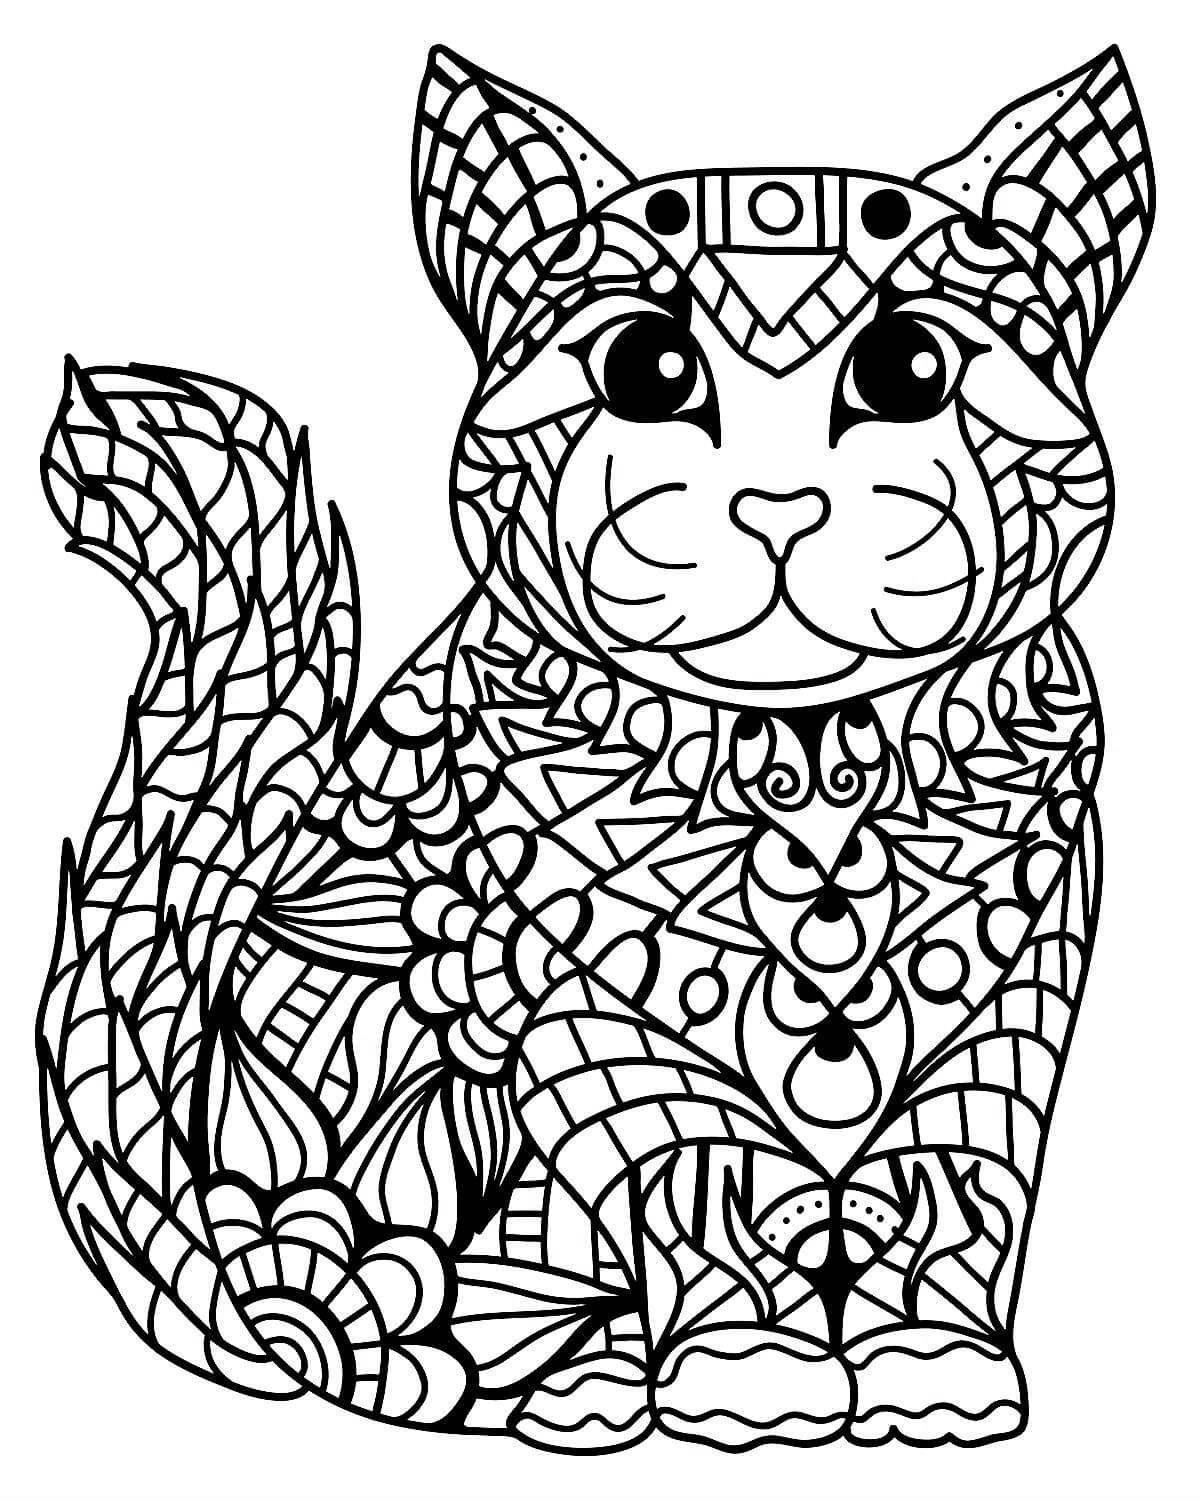 Coloring book blissful cat antistress